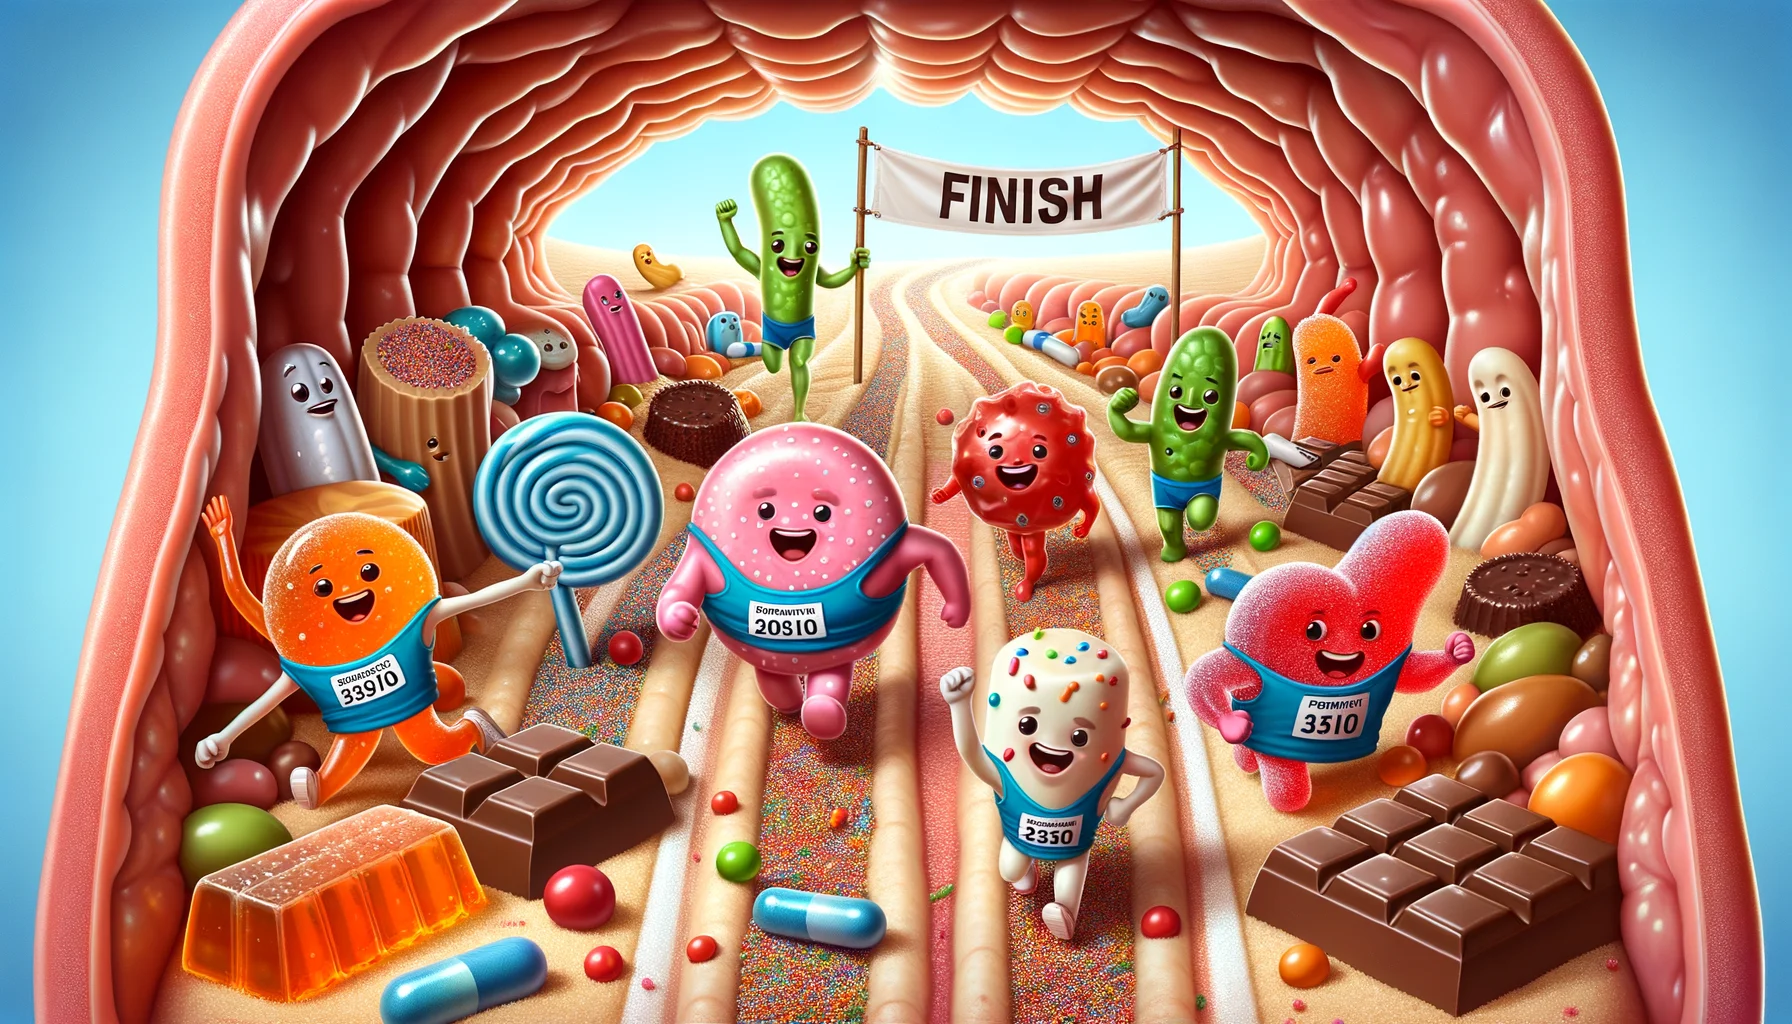 Create a humorous and realistic scene where different types of candy, like lollipops, gummy bears, and chocolates, appear to be participating in a marathon inside a cartoonish depiction of a human stomach. The candies are wearing sports gear demonstrating their active efforts. They show delight on their faces since they are probiotic candies promoting gut health. The gut landscape is portrayed as a friendly, welcoming place with small healthy bacteria cheering on the sides. An improvised finish line is held up by two friendly microorganisms, showing the enjoyably active state these probiotics bring to the gut.